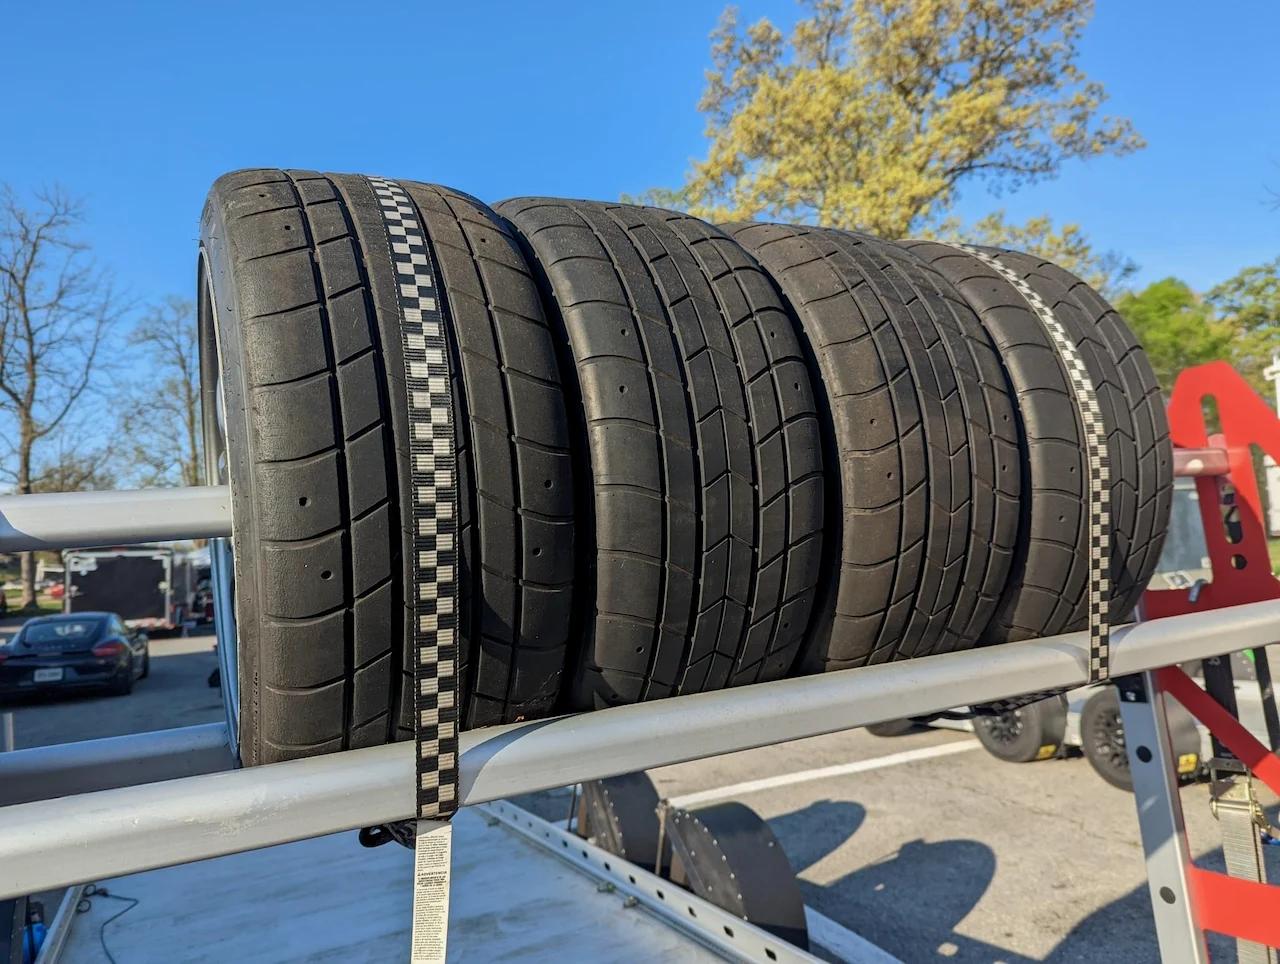 Securing tires on a Tire Rack